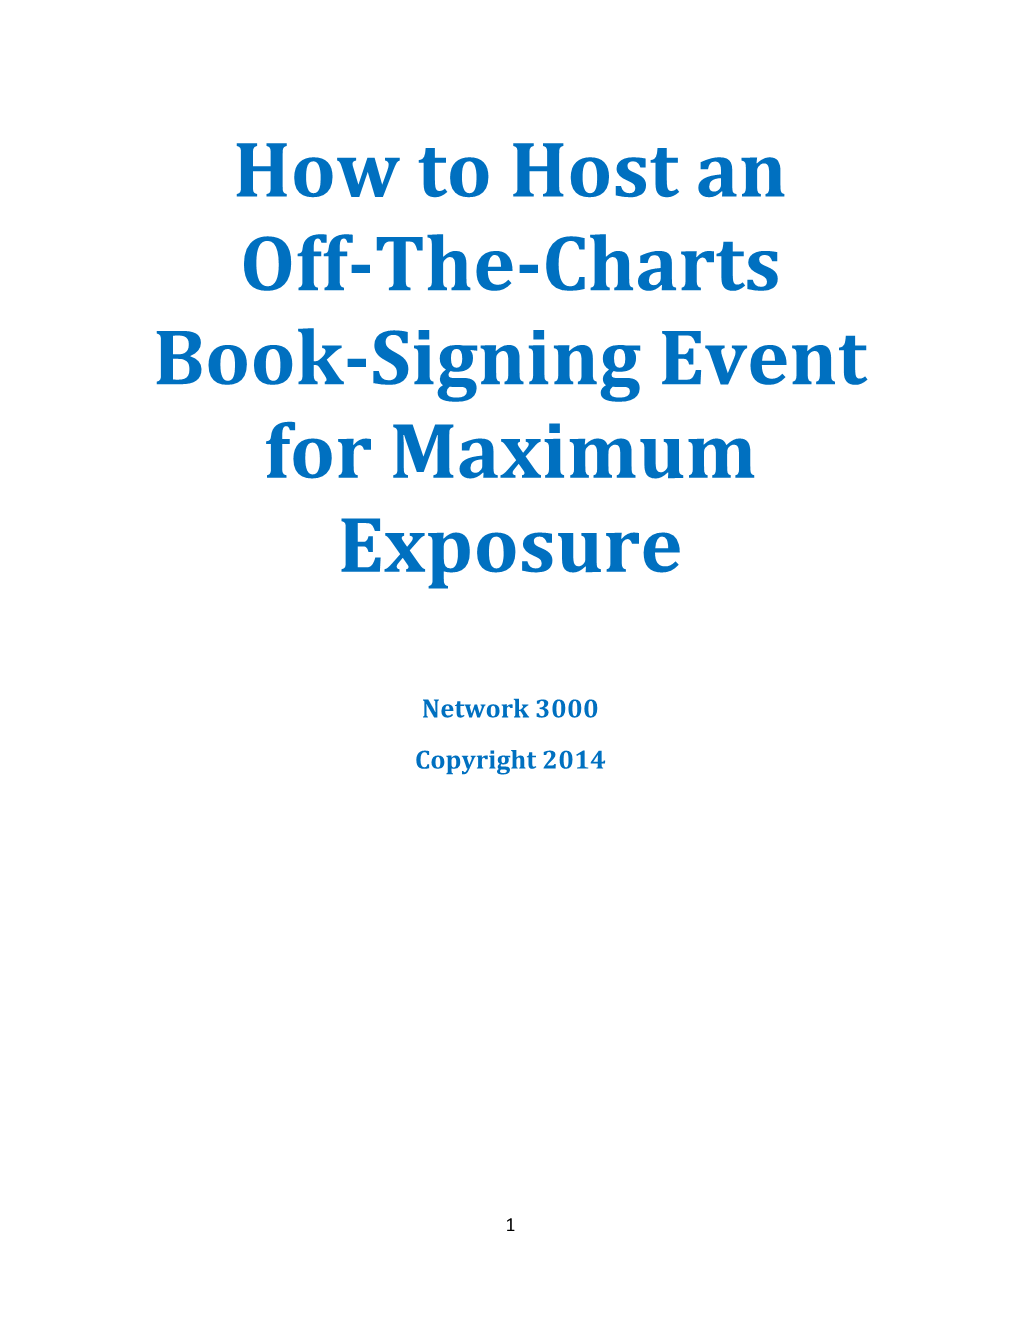 How to Host an Off-The-Charts Book-Signing Event for Maximum Exposure